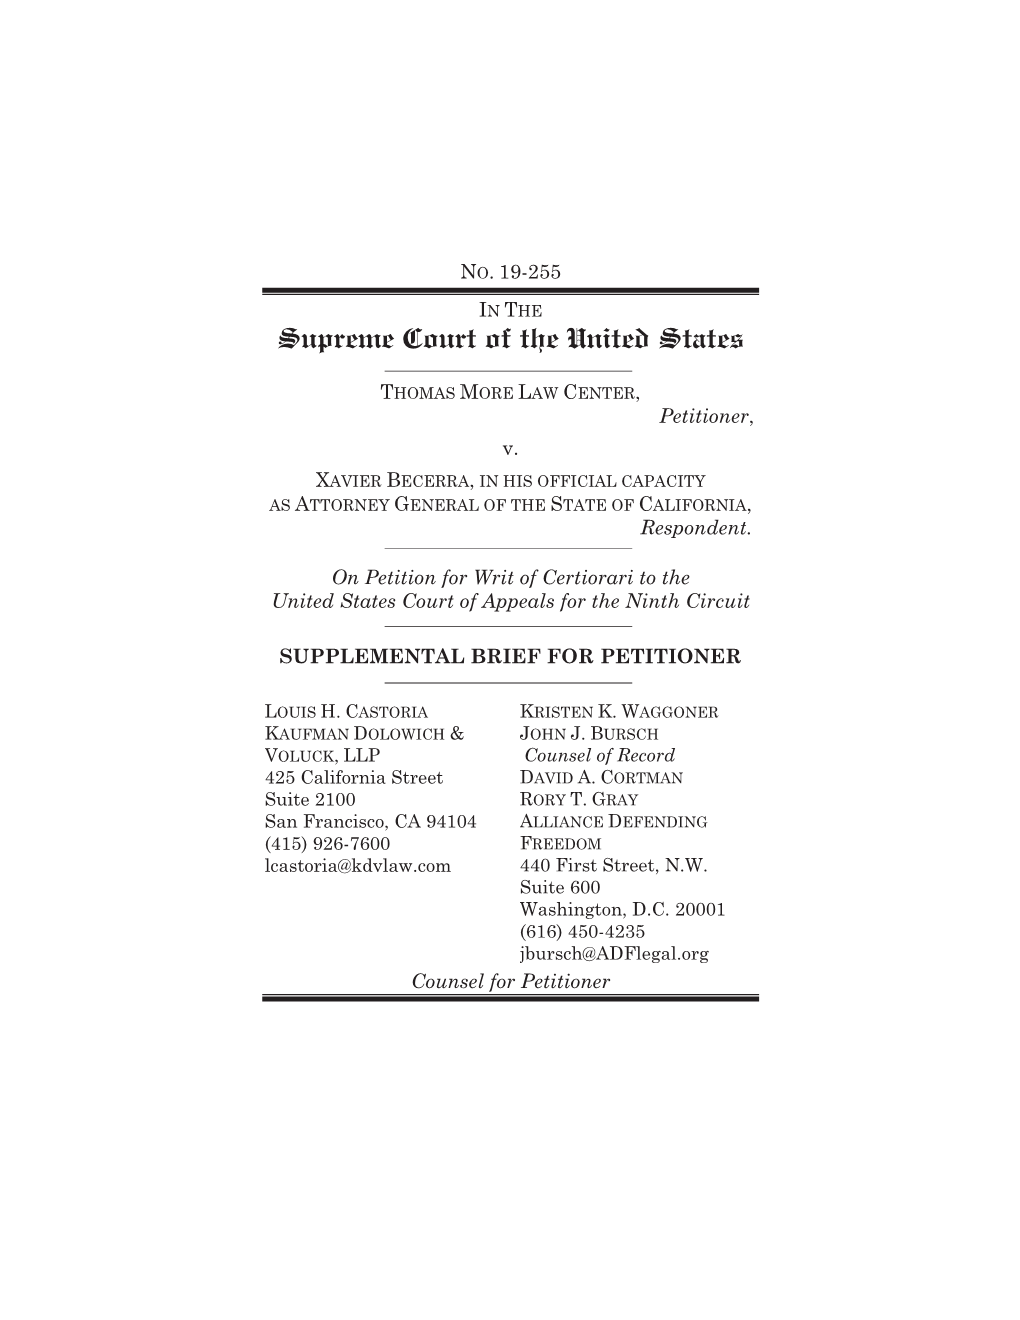 Supplemental Brief for Petitioner